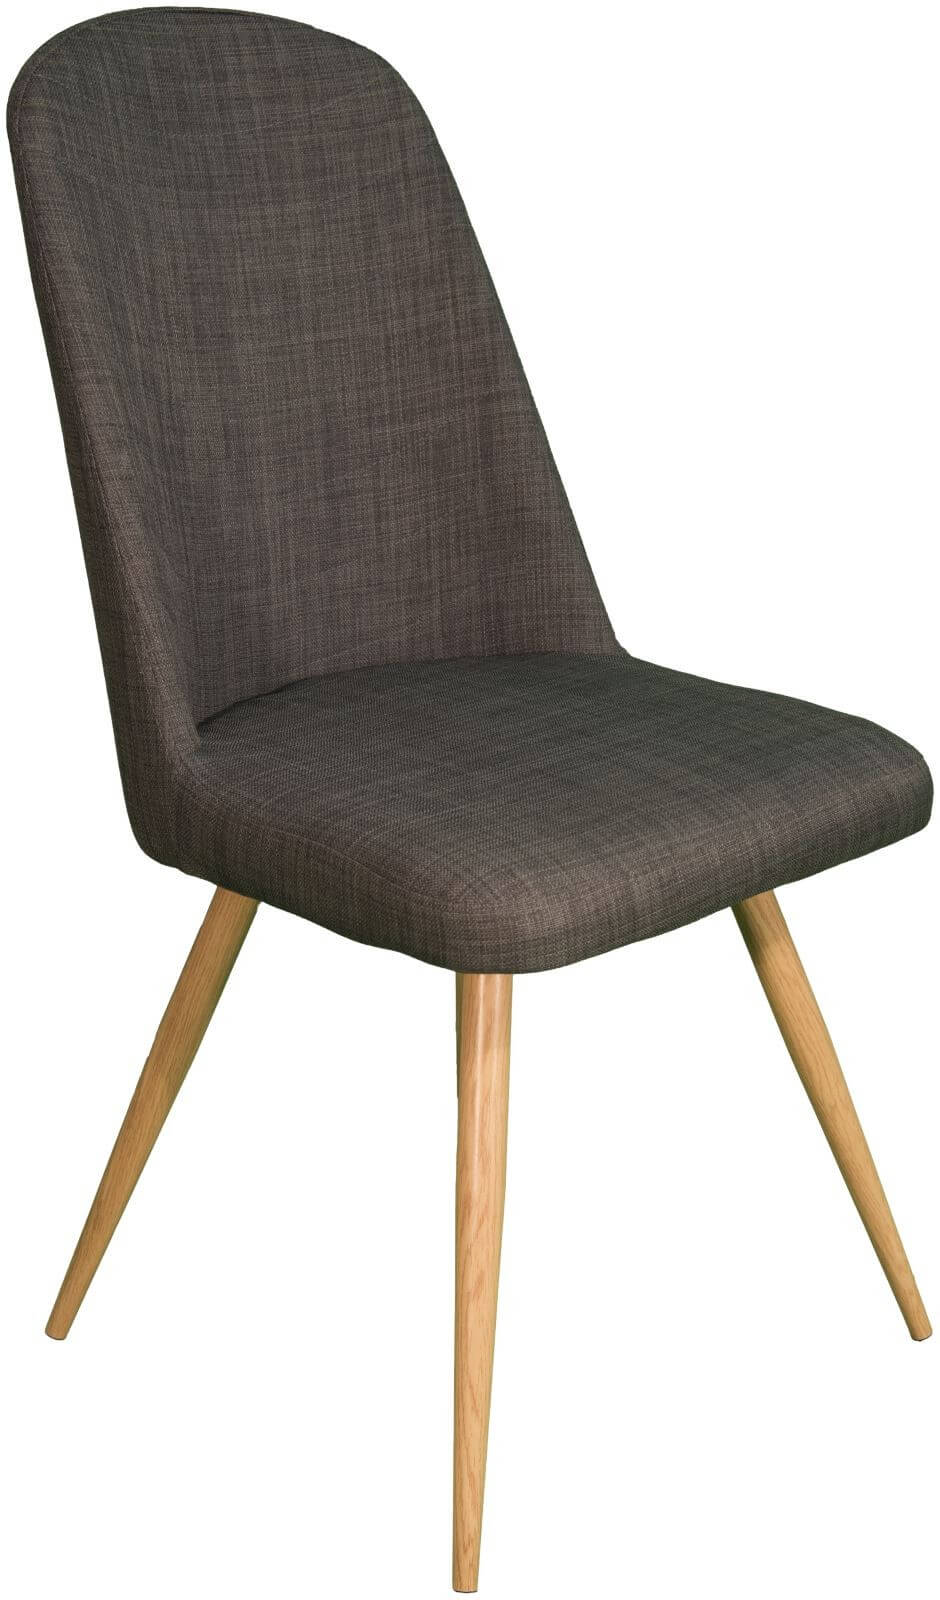 Showing image for Cancun high-back dining chair